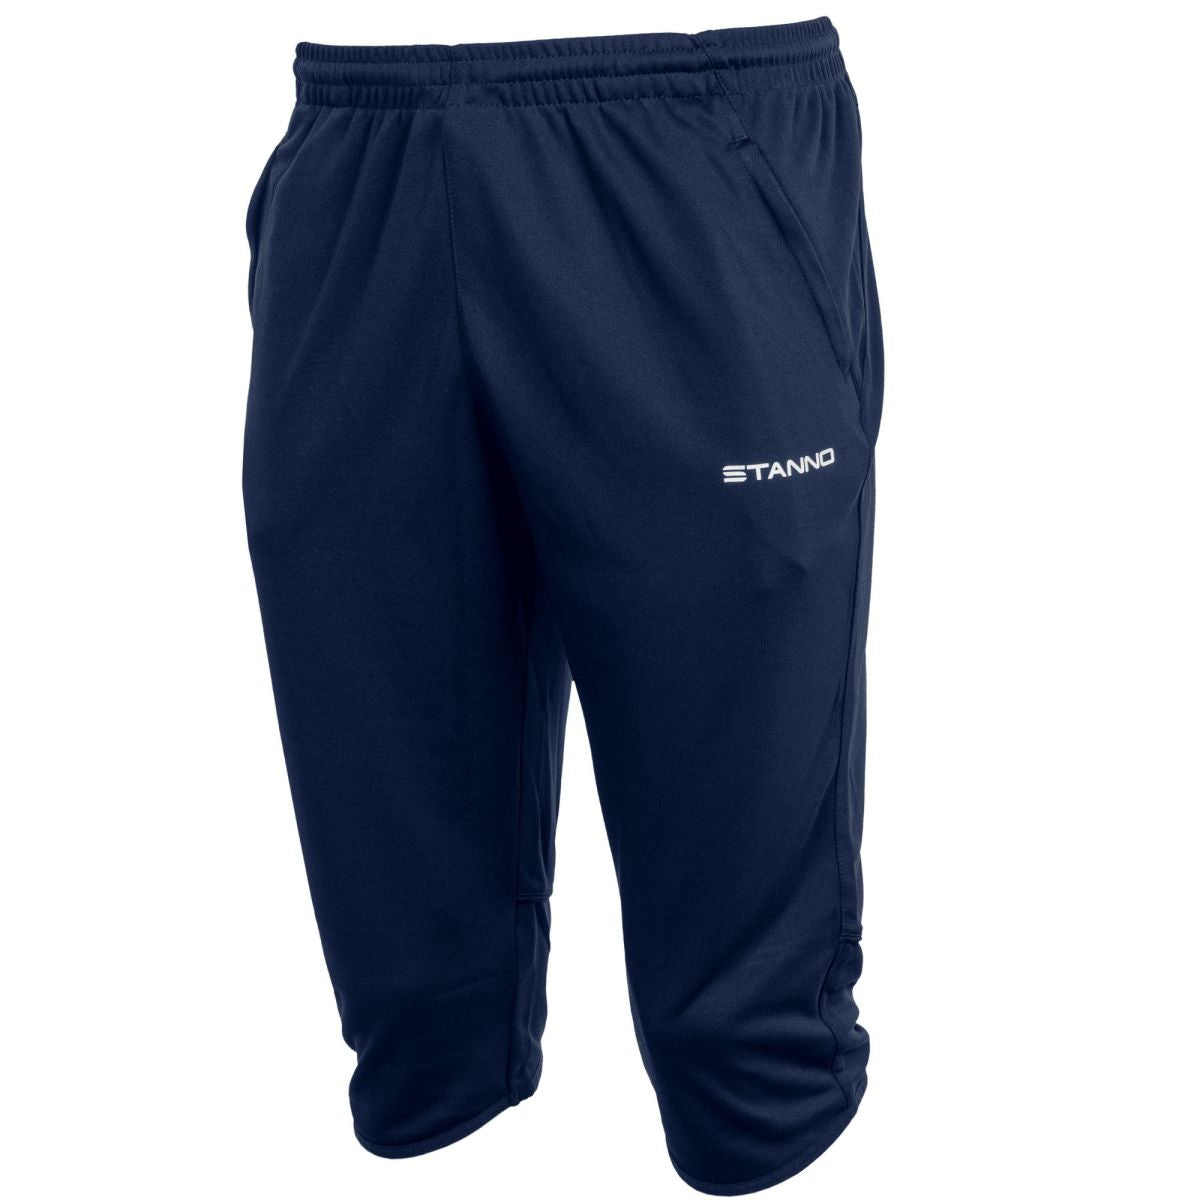 CENTRO FITTED SHORT Navy